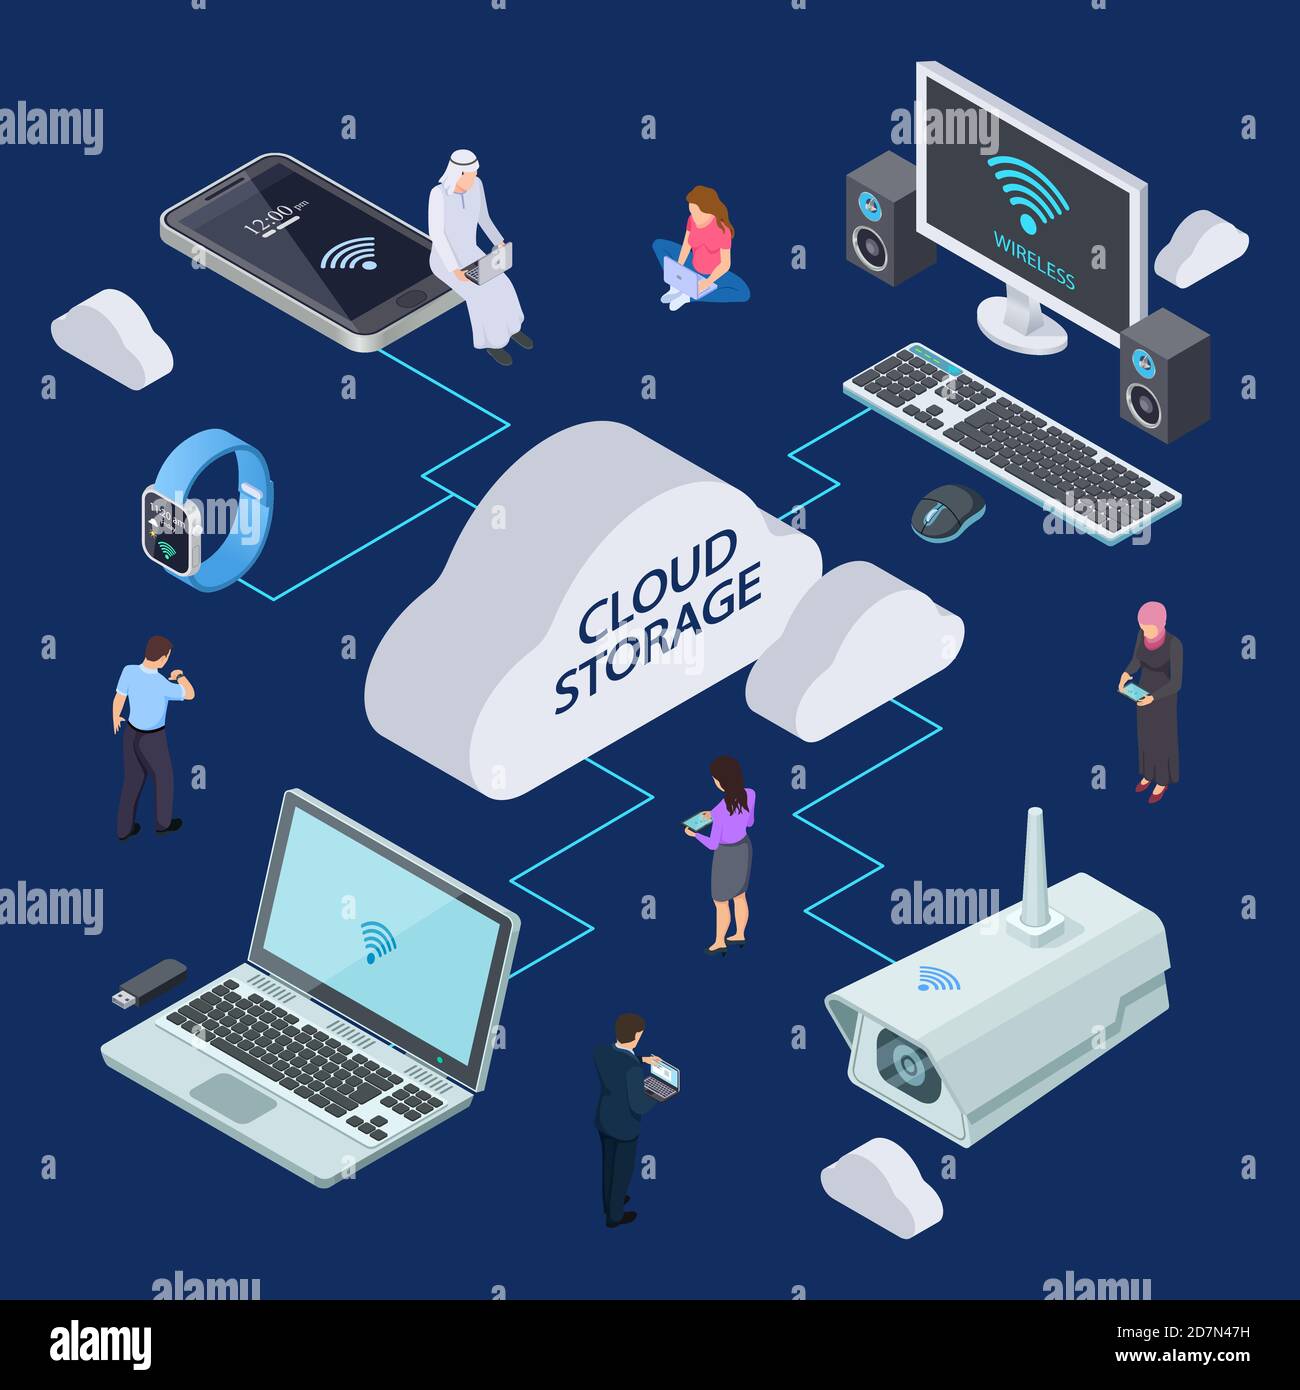 Isometric cloud service vector concept. Cloud storage illustration. Cloud data computing, storage service network system Stock Vector